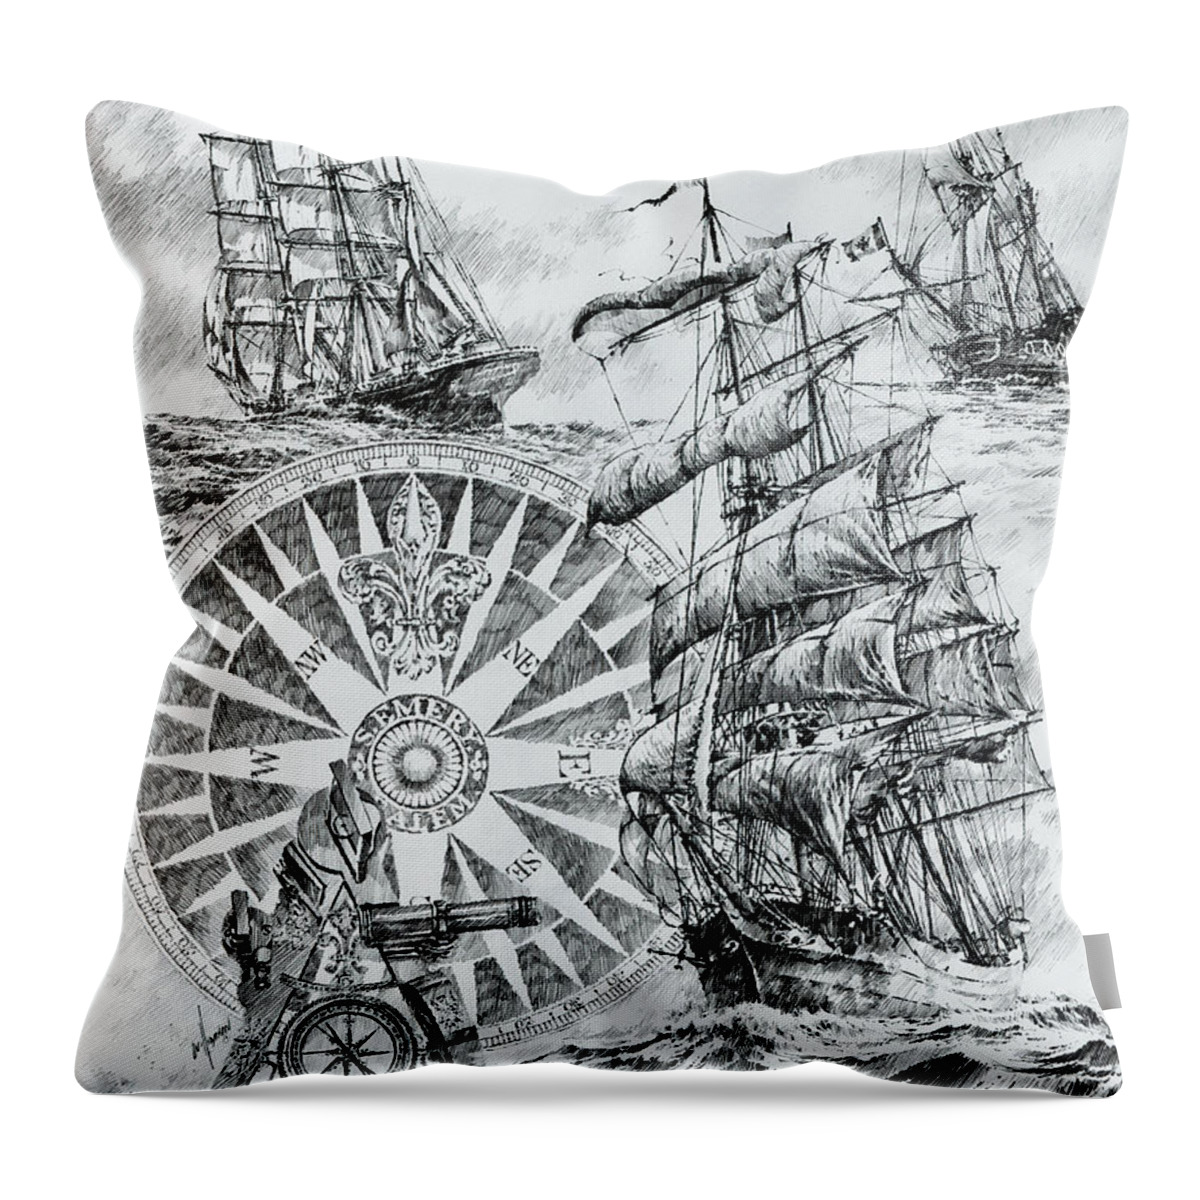 Maritime Throw Pillow featuring the drawing Maritime Heritage by James Williamson